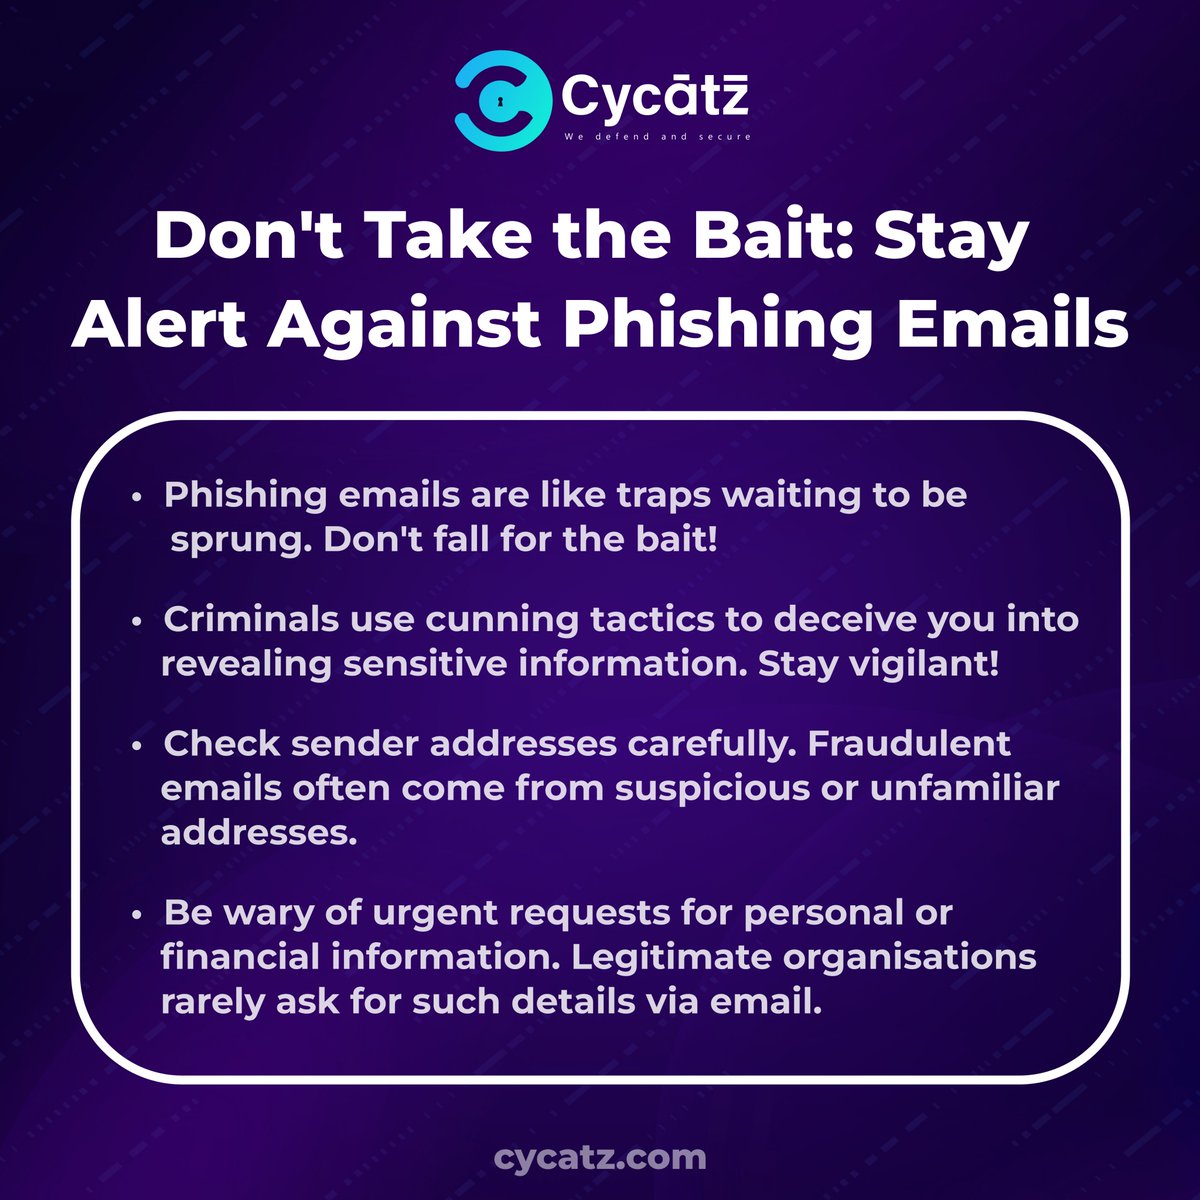 #CyCatz #Cybersecurity Don't Take the Bait: Stay Alert Against Phishing Emails

#cyberawareness #cyberattack #breaches #databreaches #cybercrime #darkwebmonitoring #SurfaceWebMonitoring #mobilesecurity #emailsecurity #vendorriskmanagement #BrandMonitoring #email